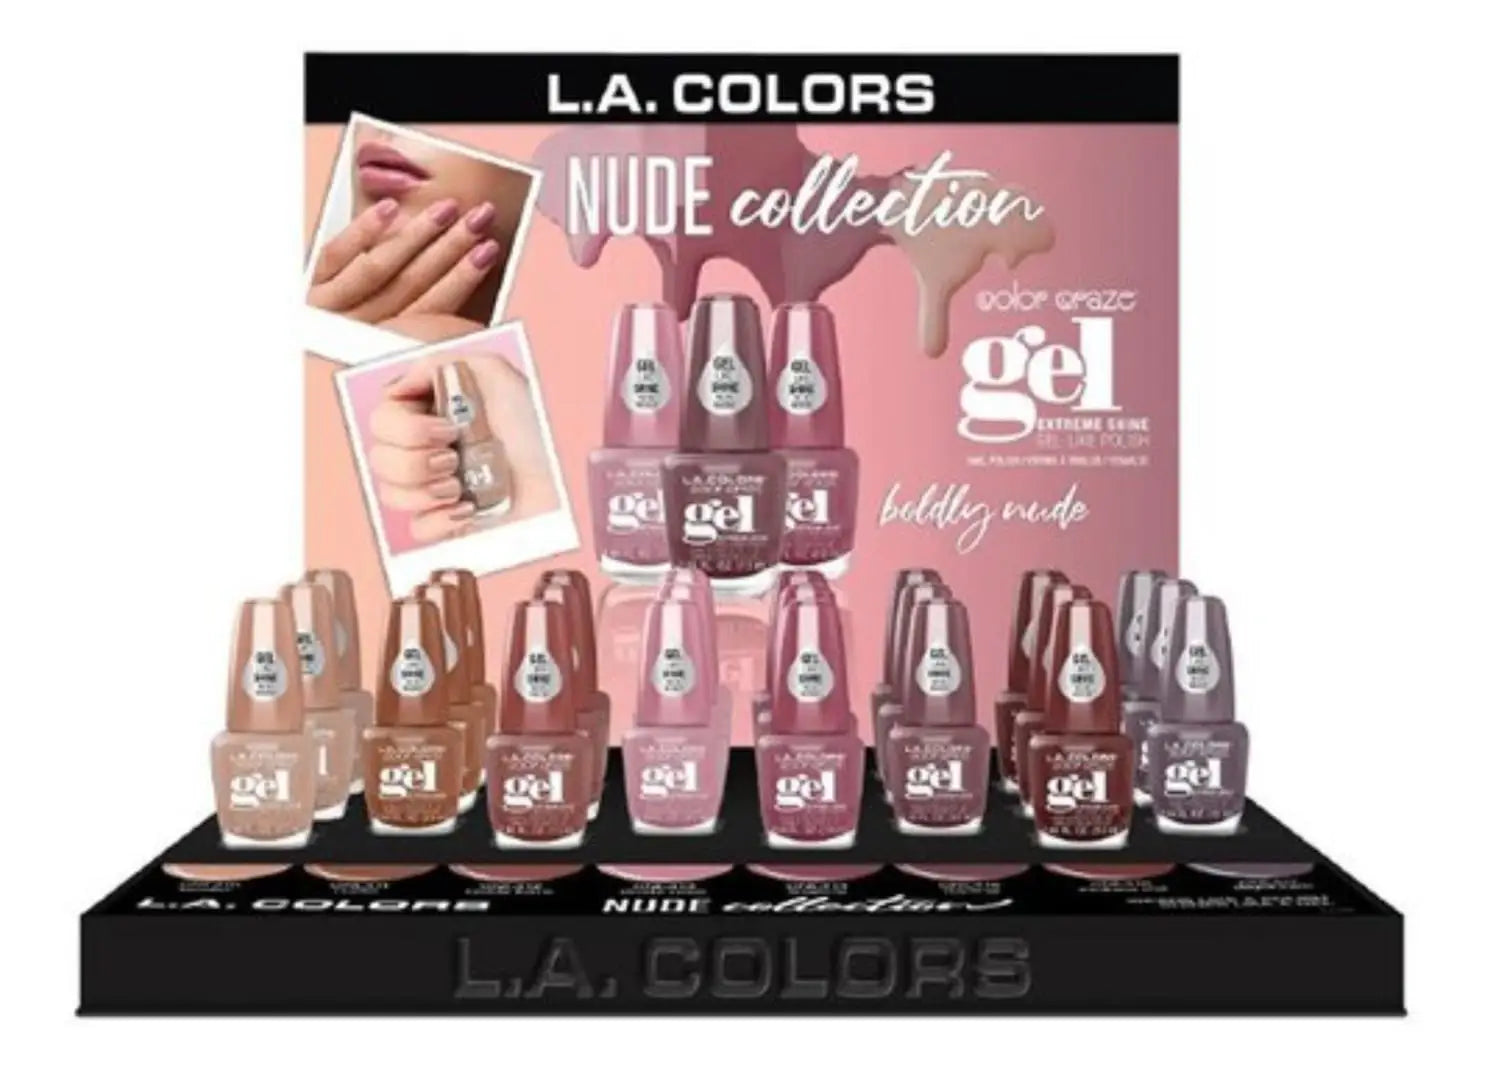 L.A. Colors Nude Collection